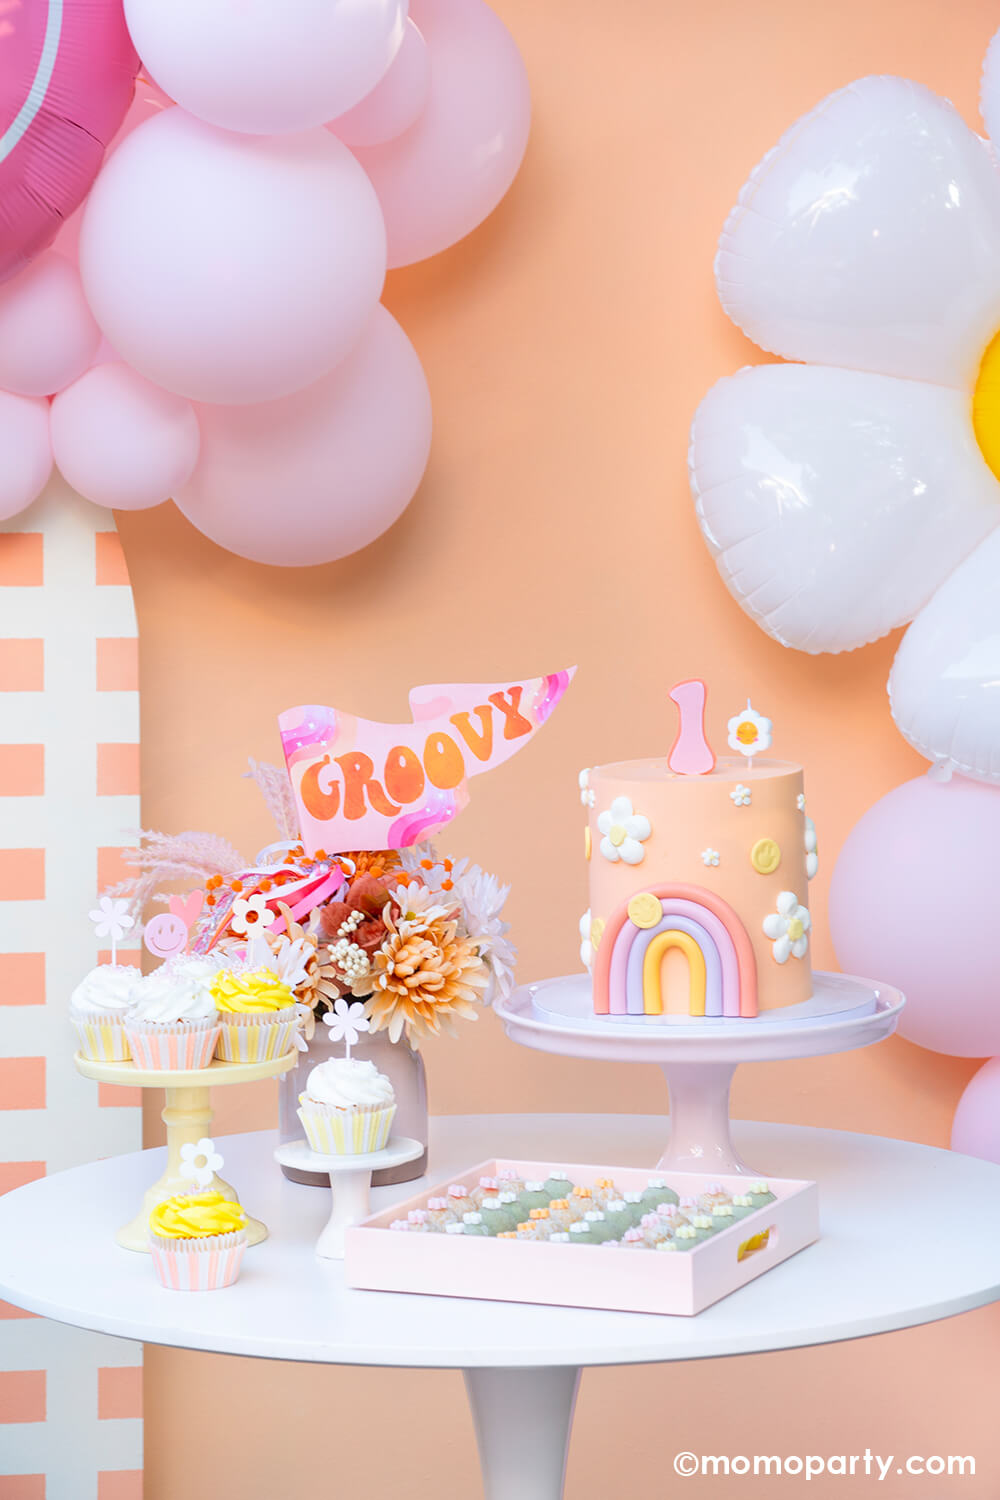 https://www.momoparty.com/cdn/shop/files/Momo-Party_One-Groovy-Baby_First-Birthday-Party_Set-up_dessert-table_3_1e9d0f74-3377-4502-99af-0e62d2e058ce.jpg?v=1695423905&width=1000